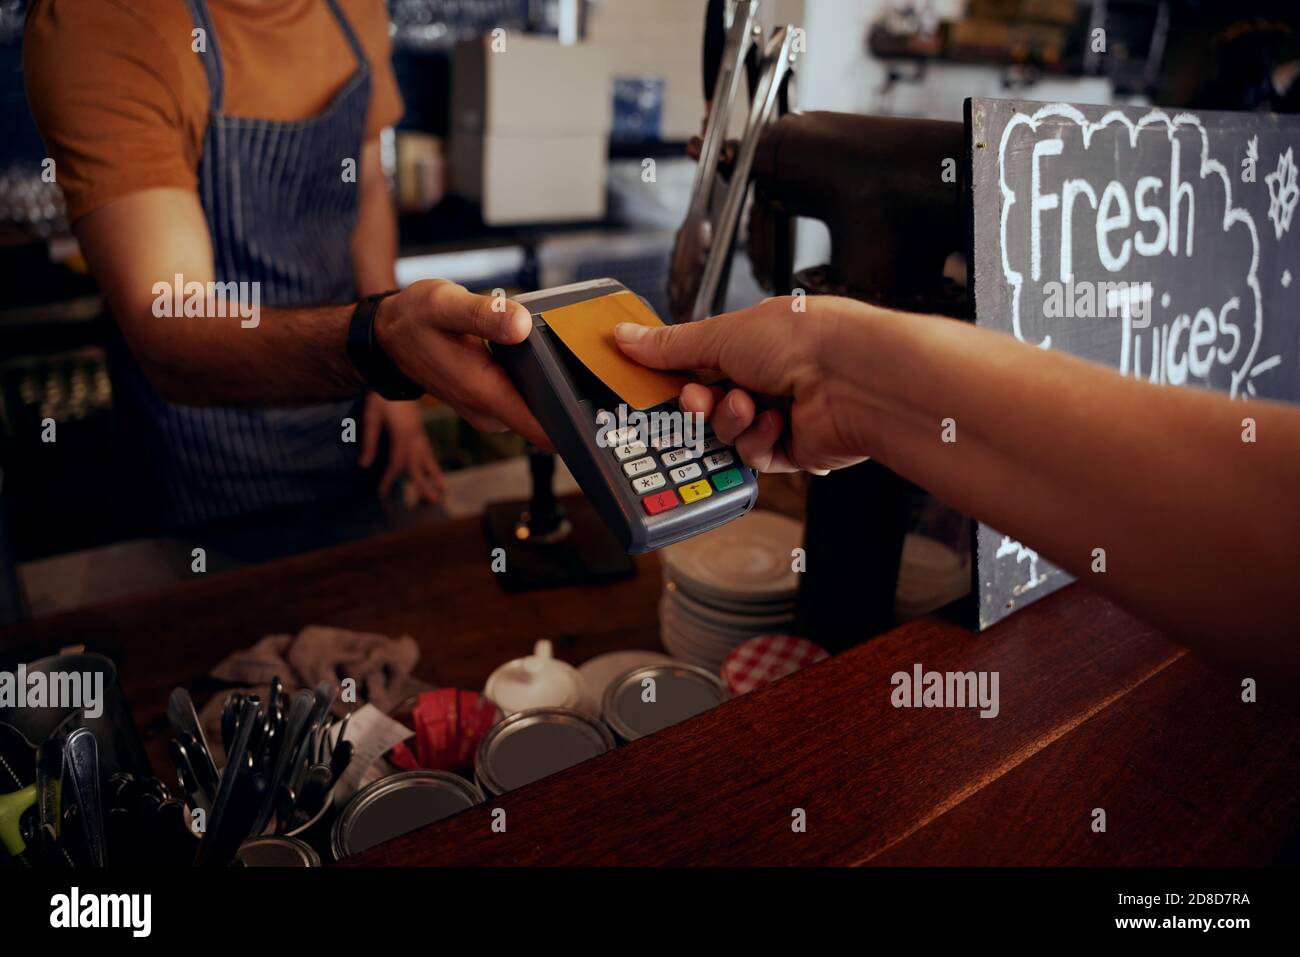 Female hands holding card against nfs payment machine to make payment for purchase in cafe Stock Photo